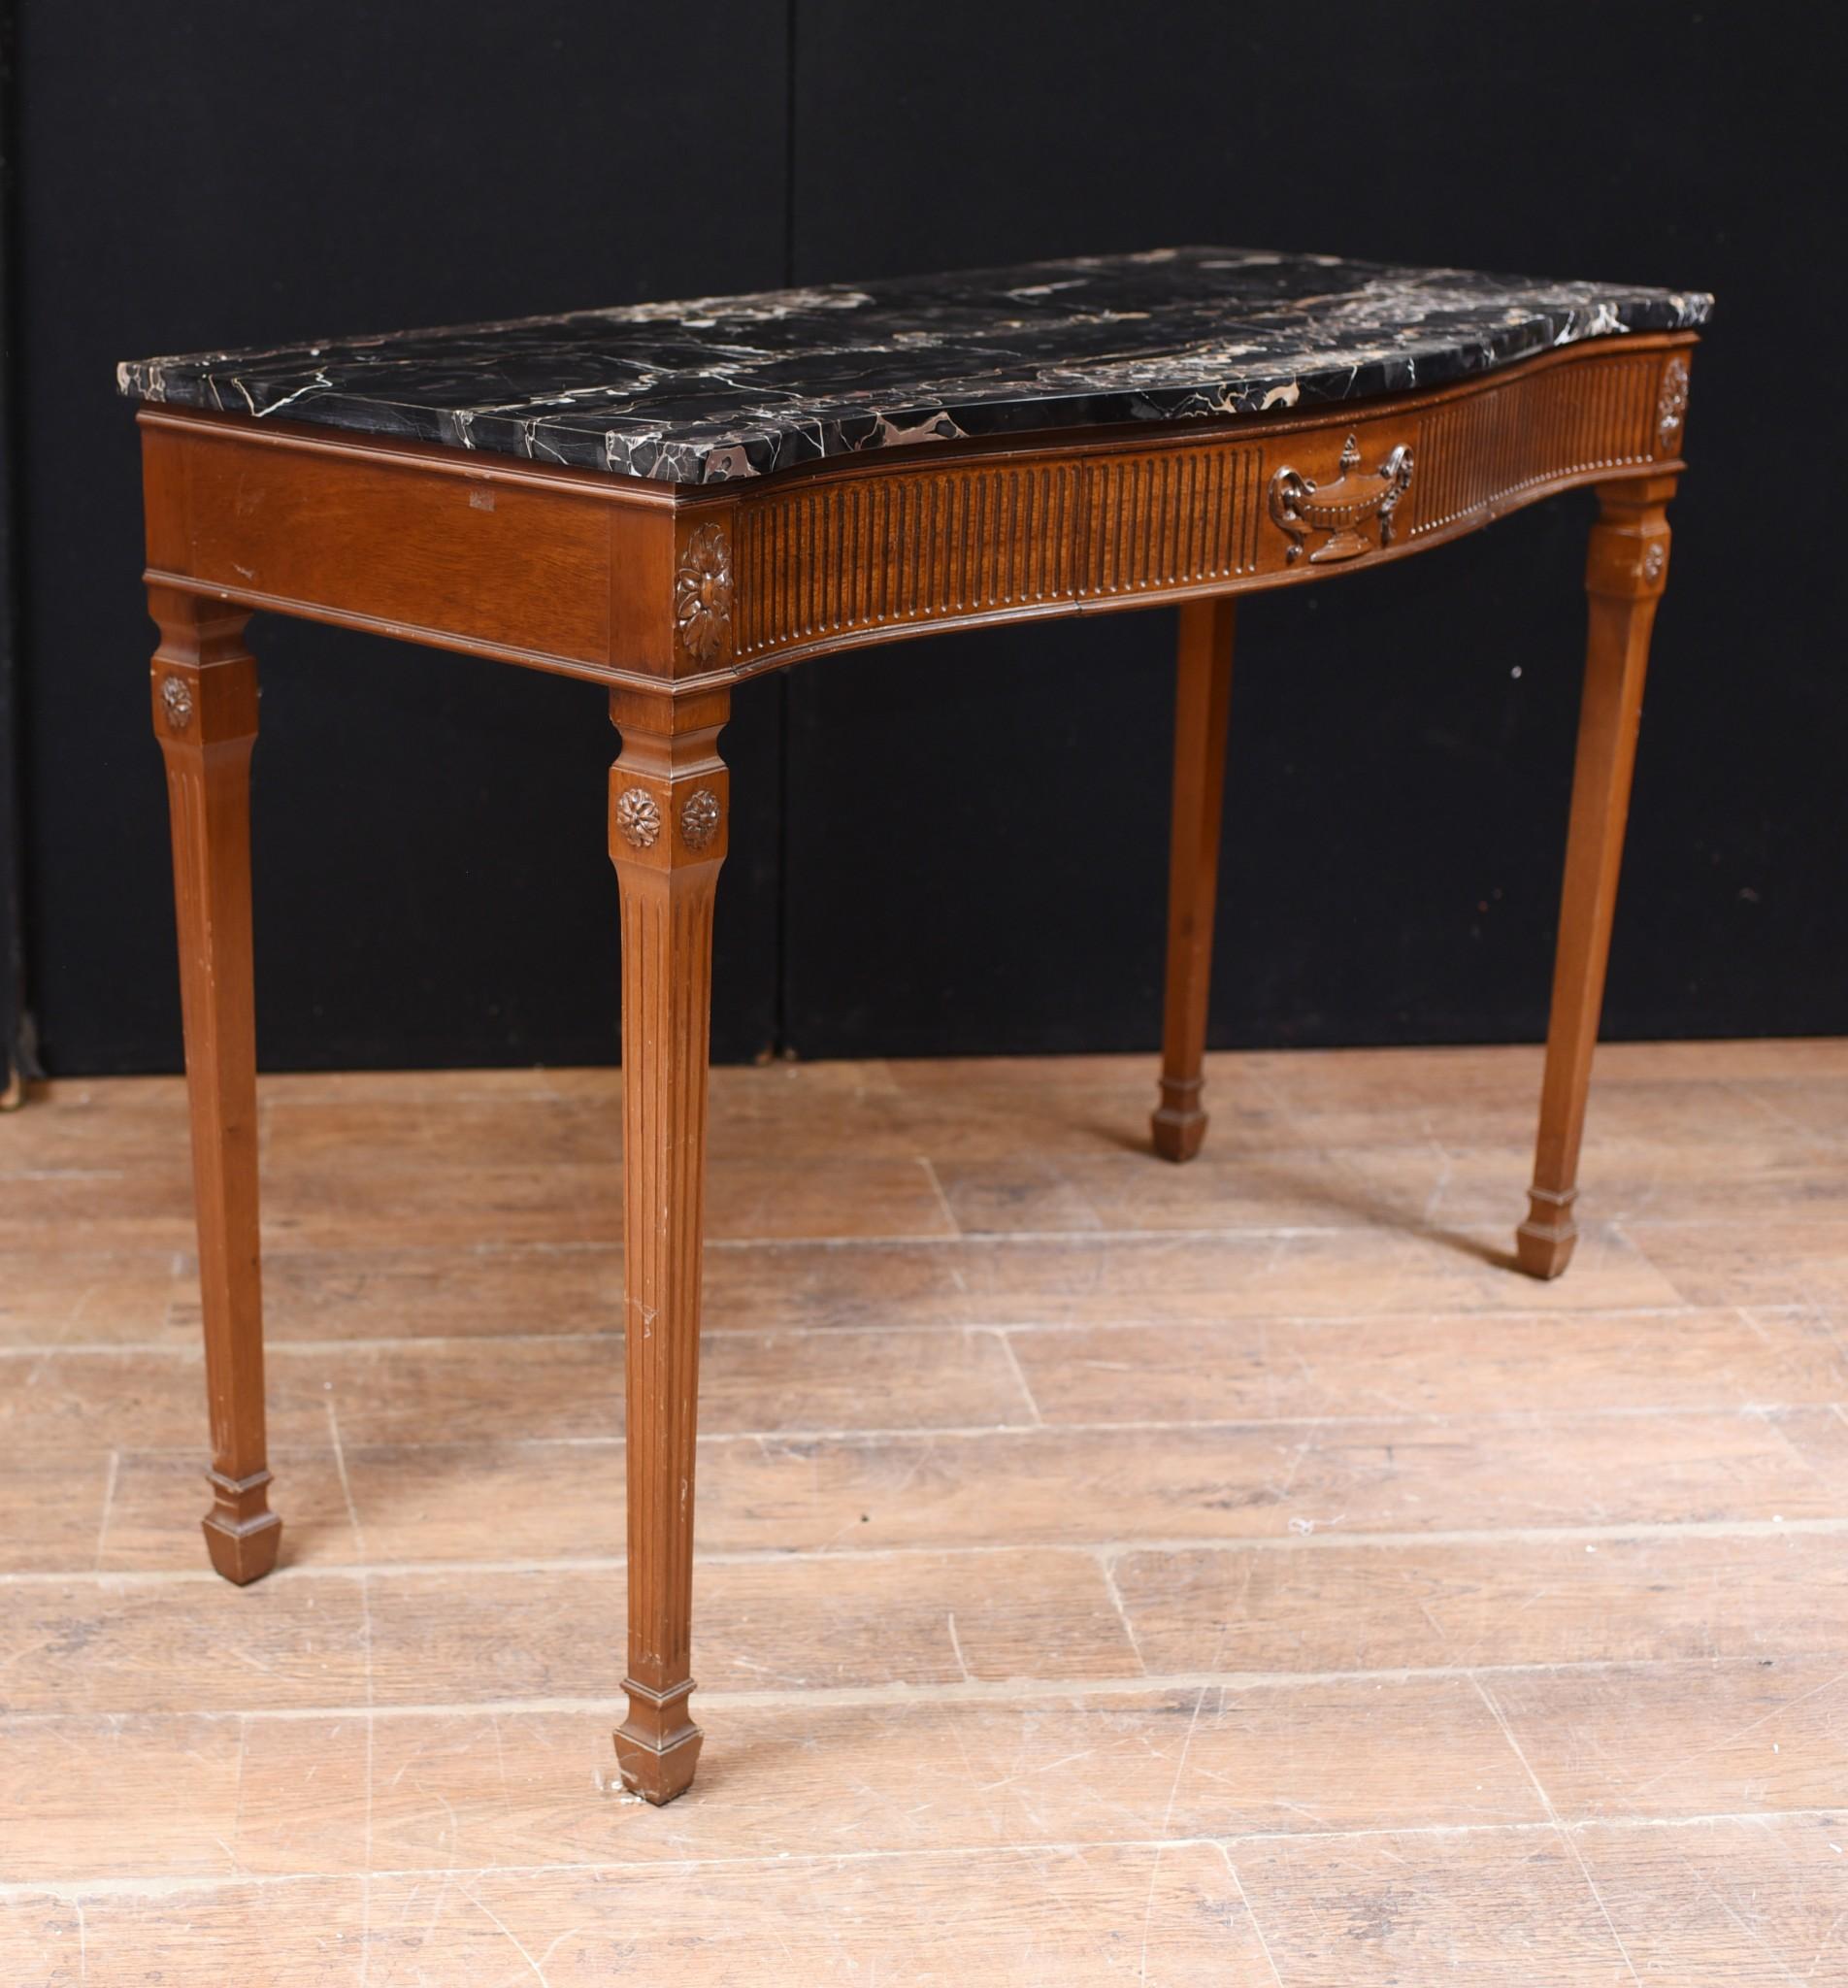 Gorgeous Adams style console table in mahogany with marble top
Drawer on front opens out to offer more storage
Classical motifs such as wide urn and rosettes to top of fluted legs 
Marble top is smooth and chip free
Offered in great shape, ready